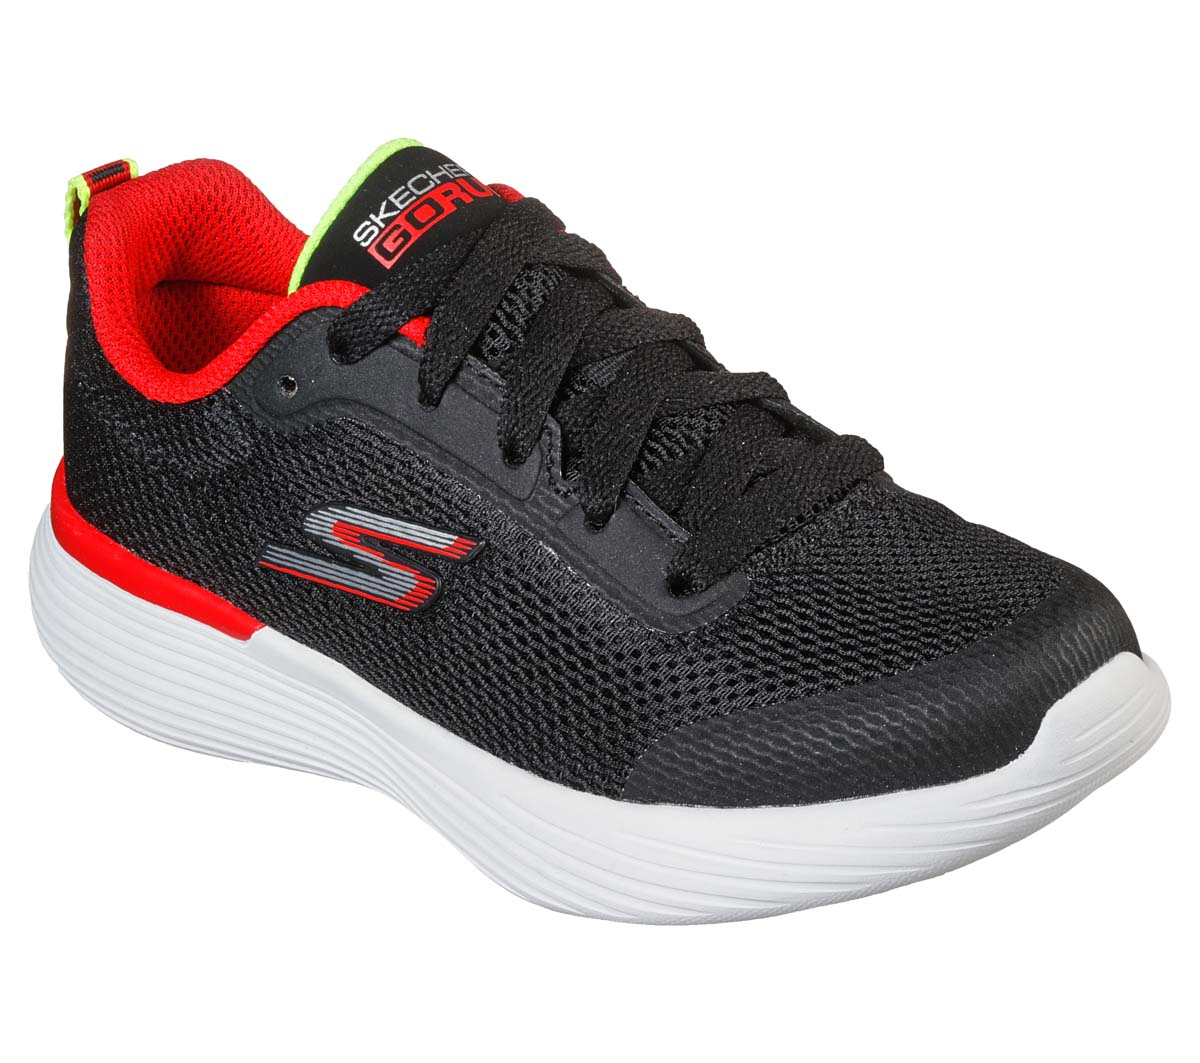 Skechers Go Run 400 Lace Black Red Kids Trainers 405100L In Size 34 In Plain Black Red For kids